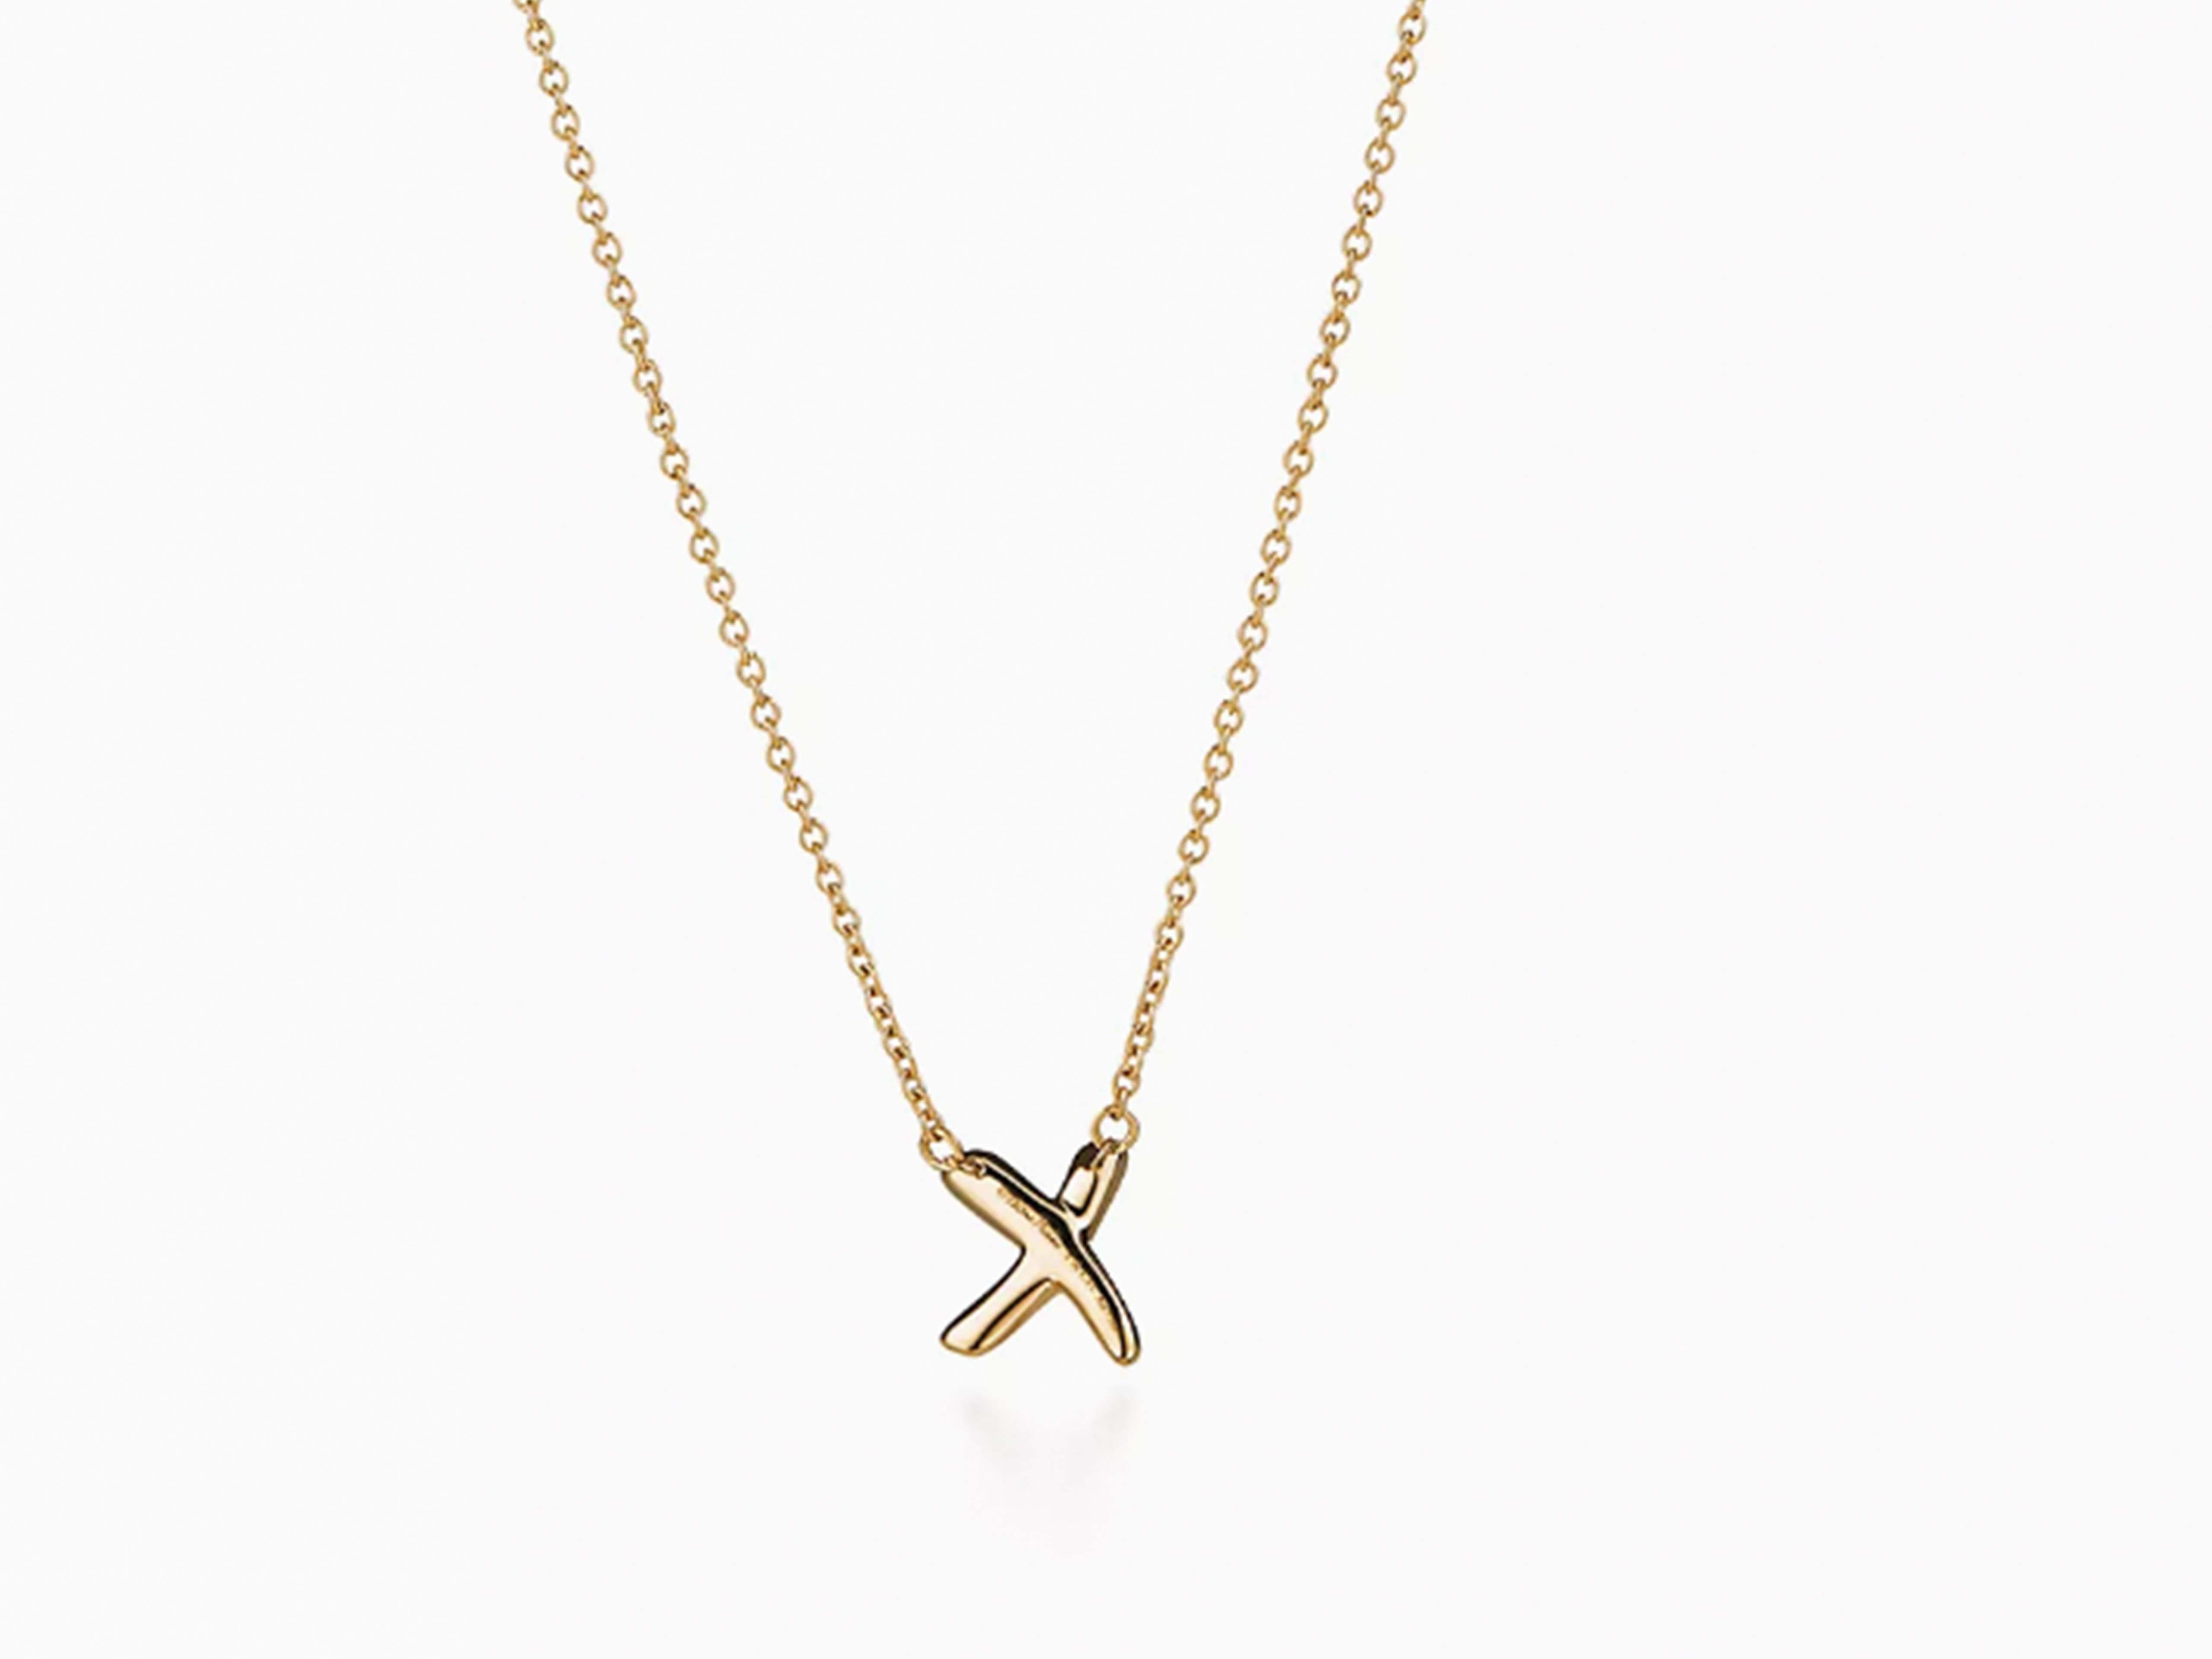 Tiffany & Co. Kiss X Necklace 18k Yellow Gold For Sale 1